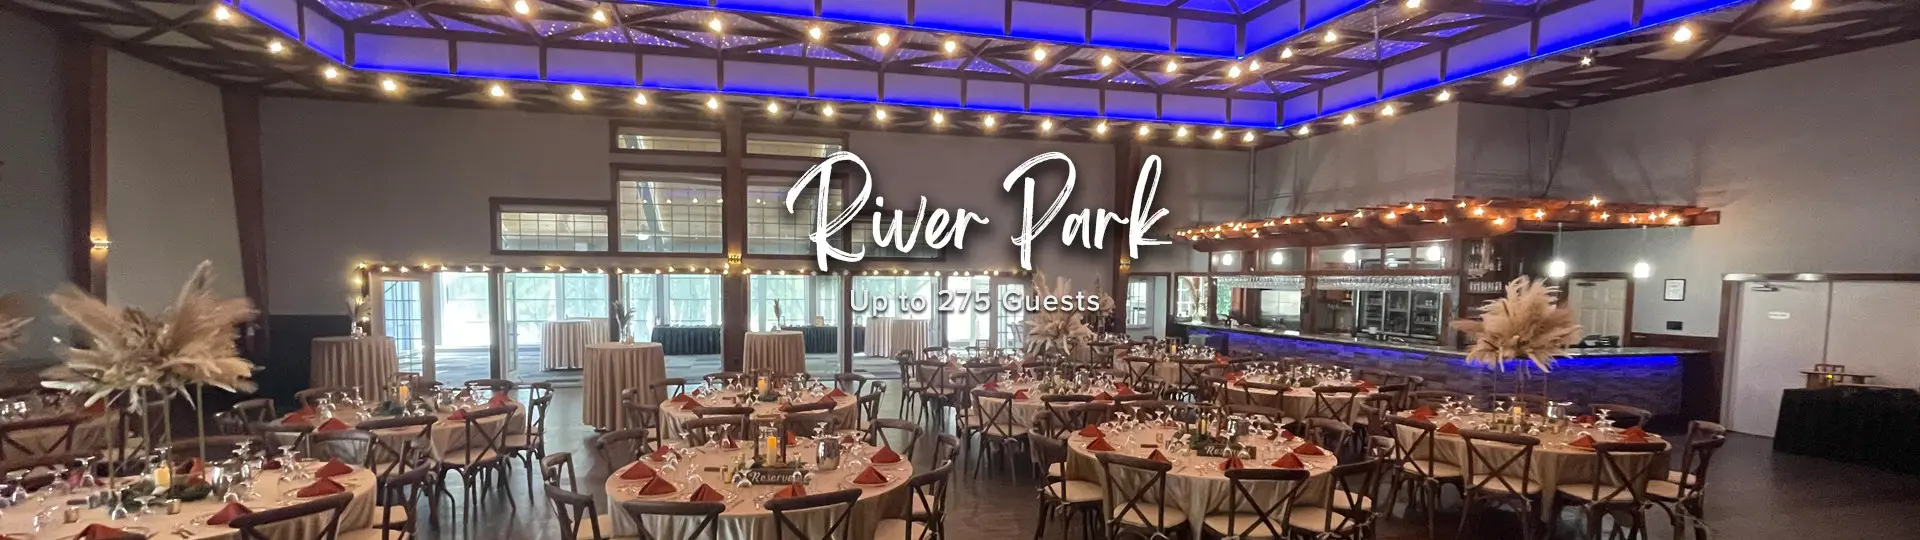 River Park Wedding Venue up to 275 Guests at Celebrations on the River La Crosse, WI